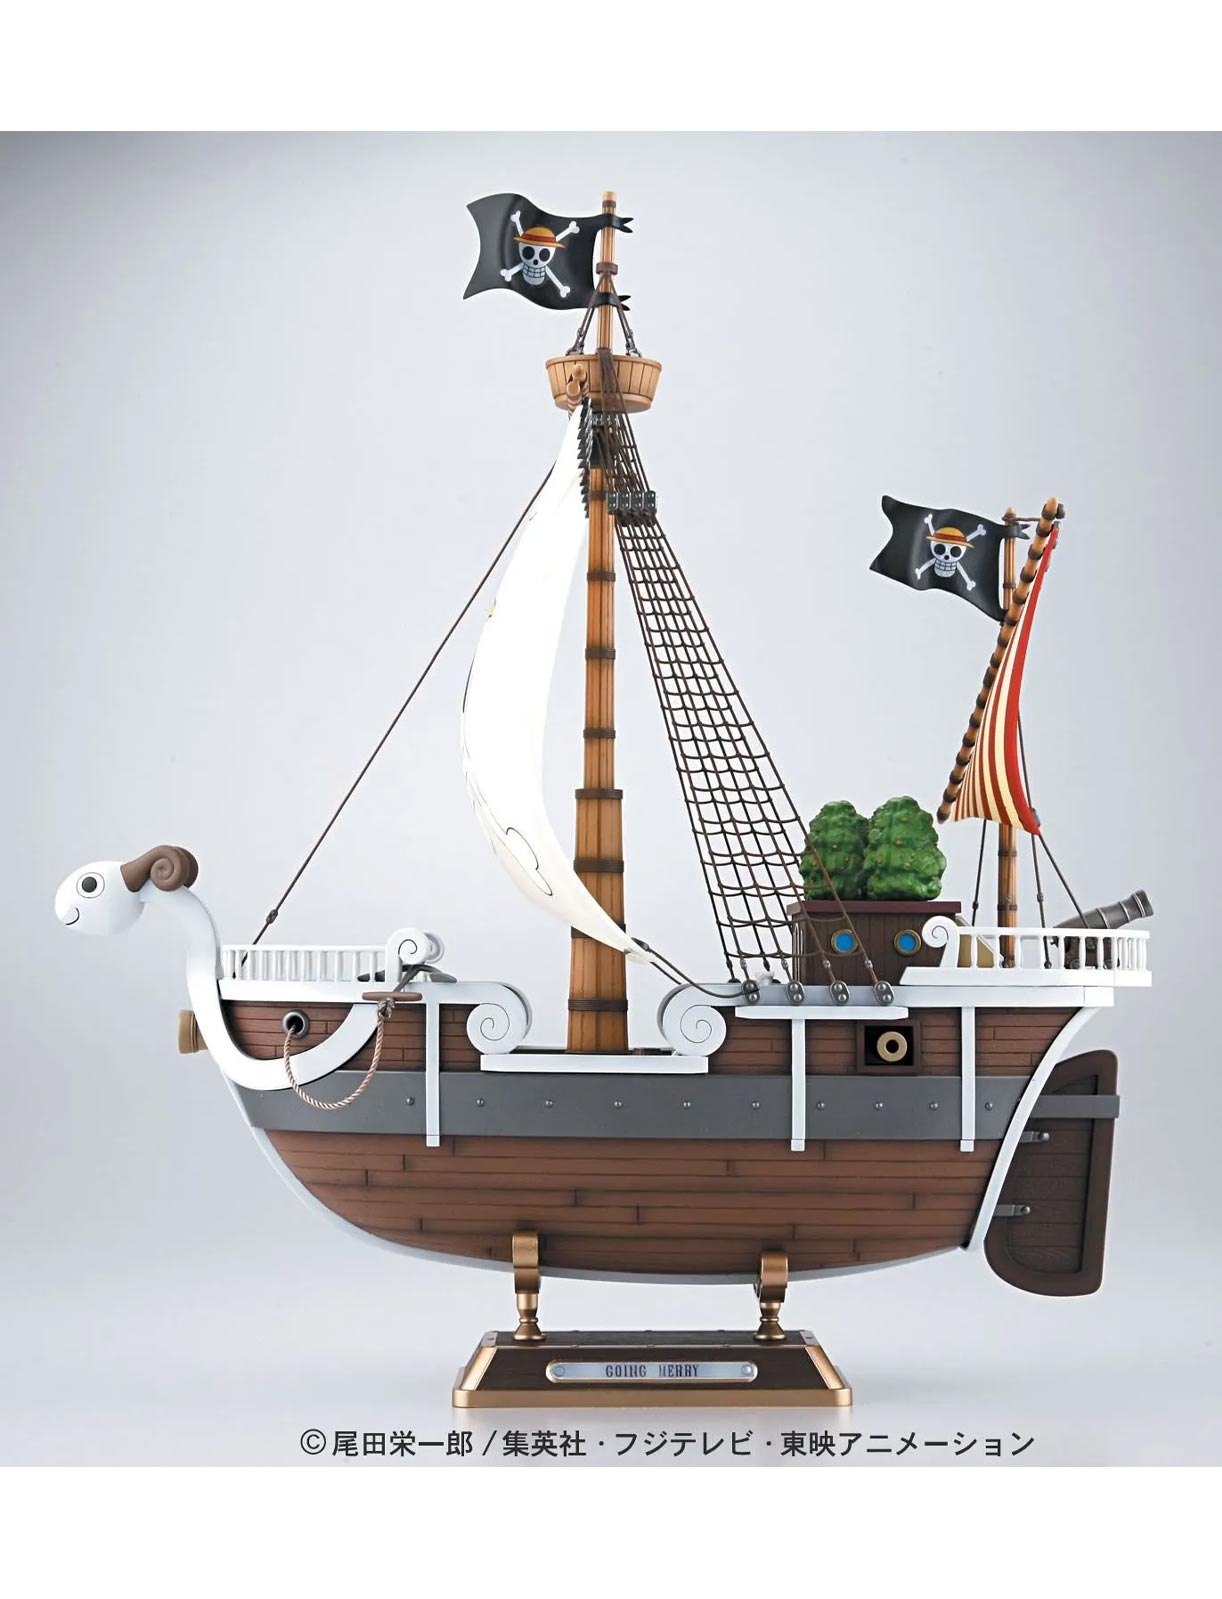 Going Merry ship from One Piece anime, side view, Taken at …